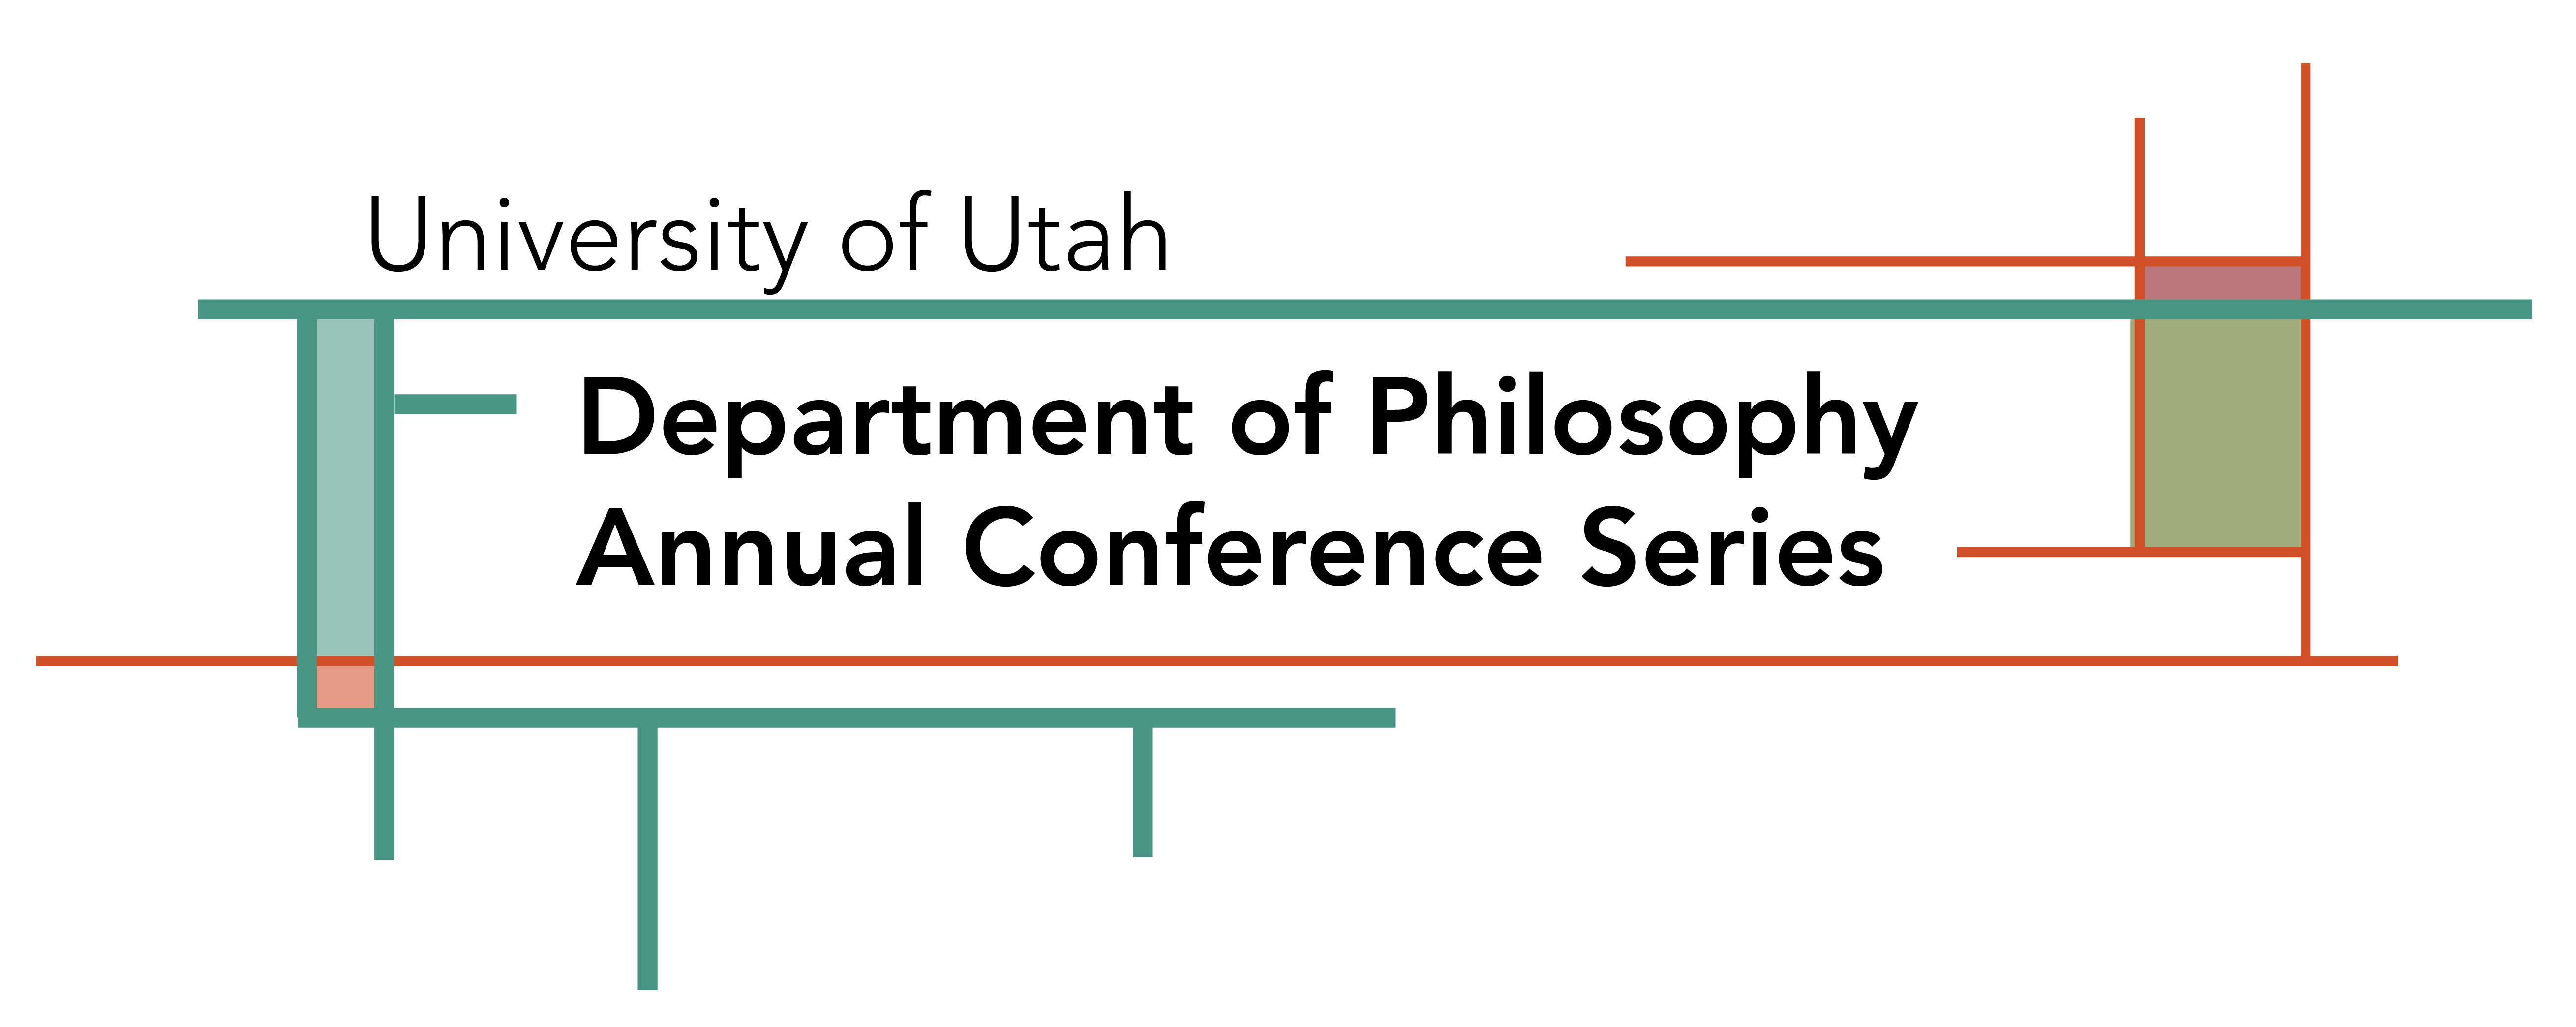 Department of Philosophy Annual Conference Series